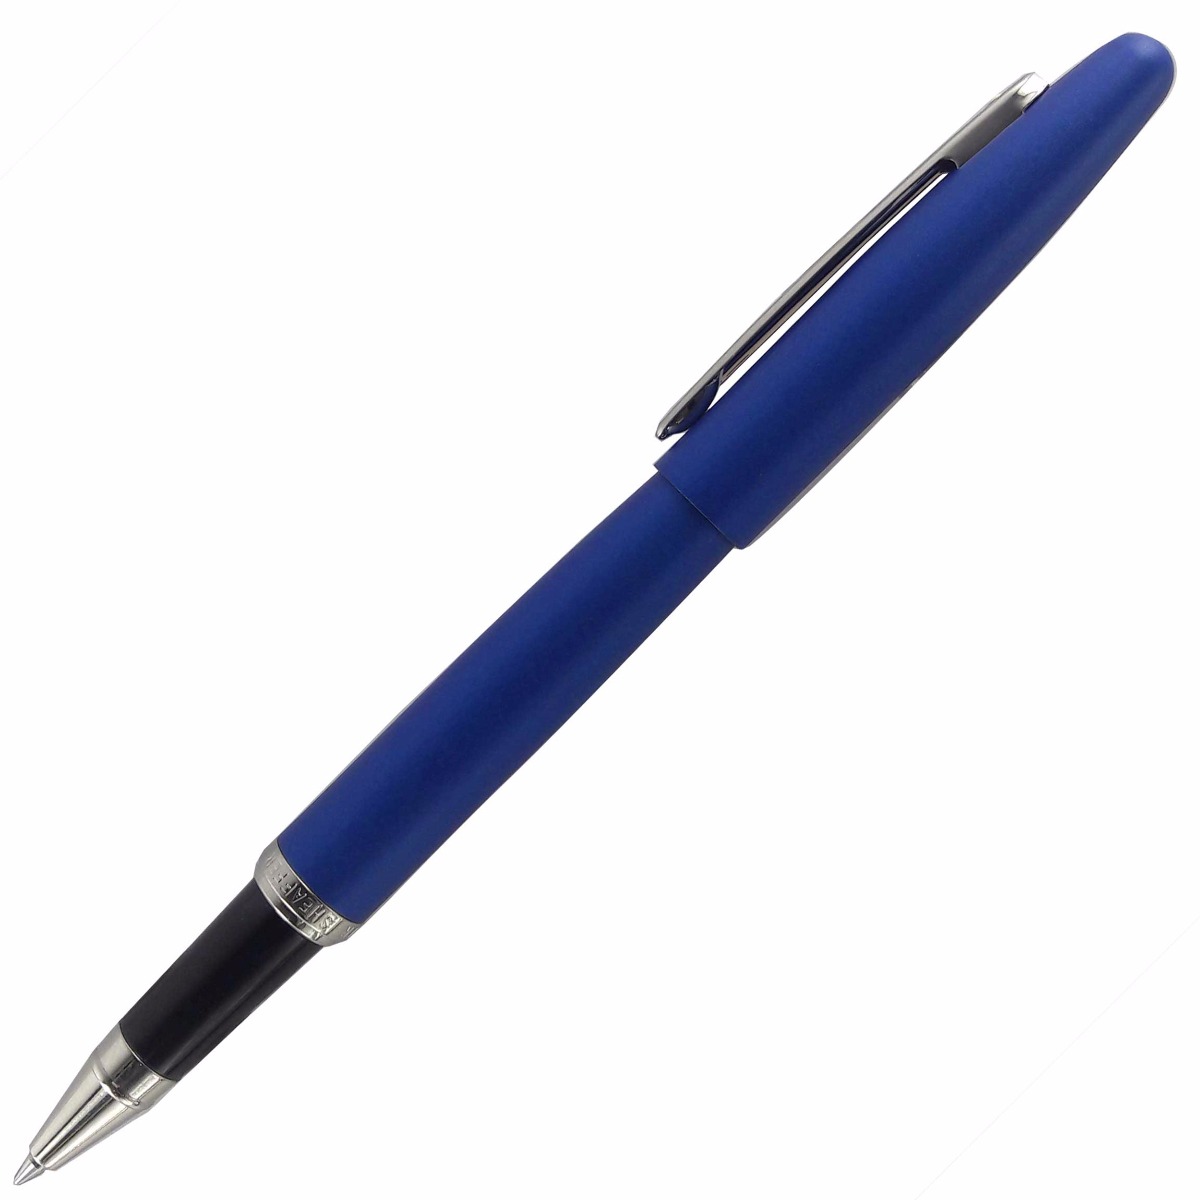 SHEAFFER BLUE COLOR BODY WITH MAT FINISH WITH SILVER CLIP CAP TYPE ROLLER BALL PEN MODEL: 13011